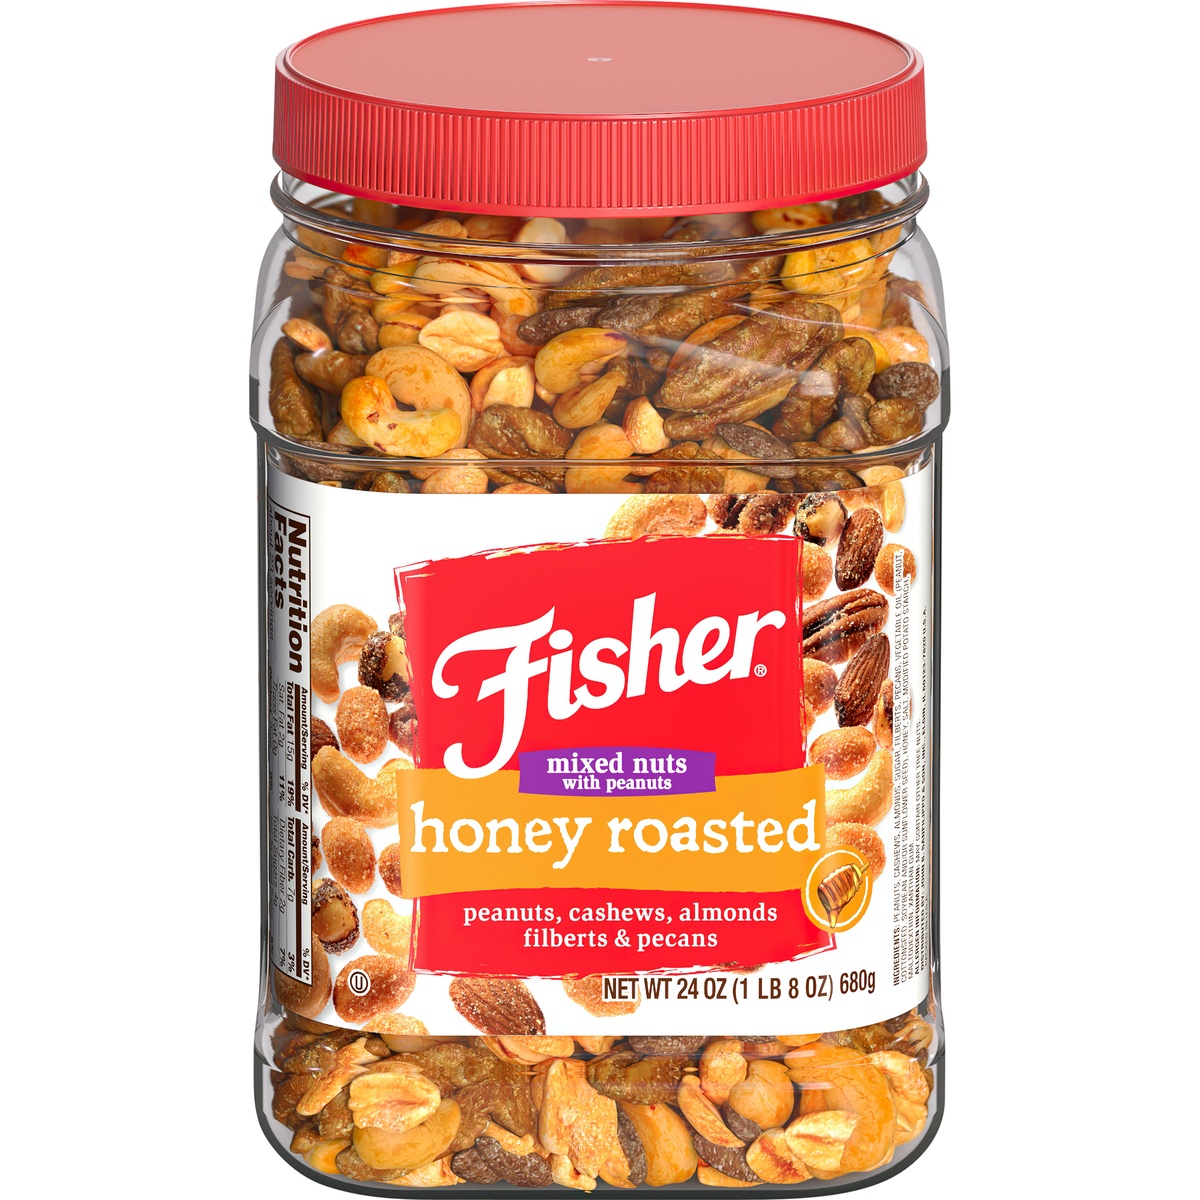 Fisher Honey Roasted Mixed Nuts with Peanuts 24 oz. Jar 24 oz